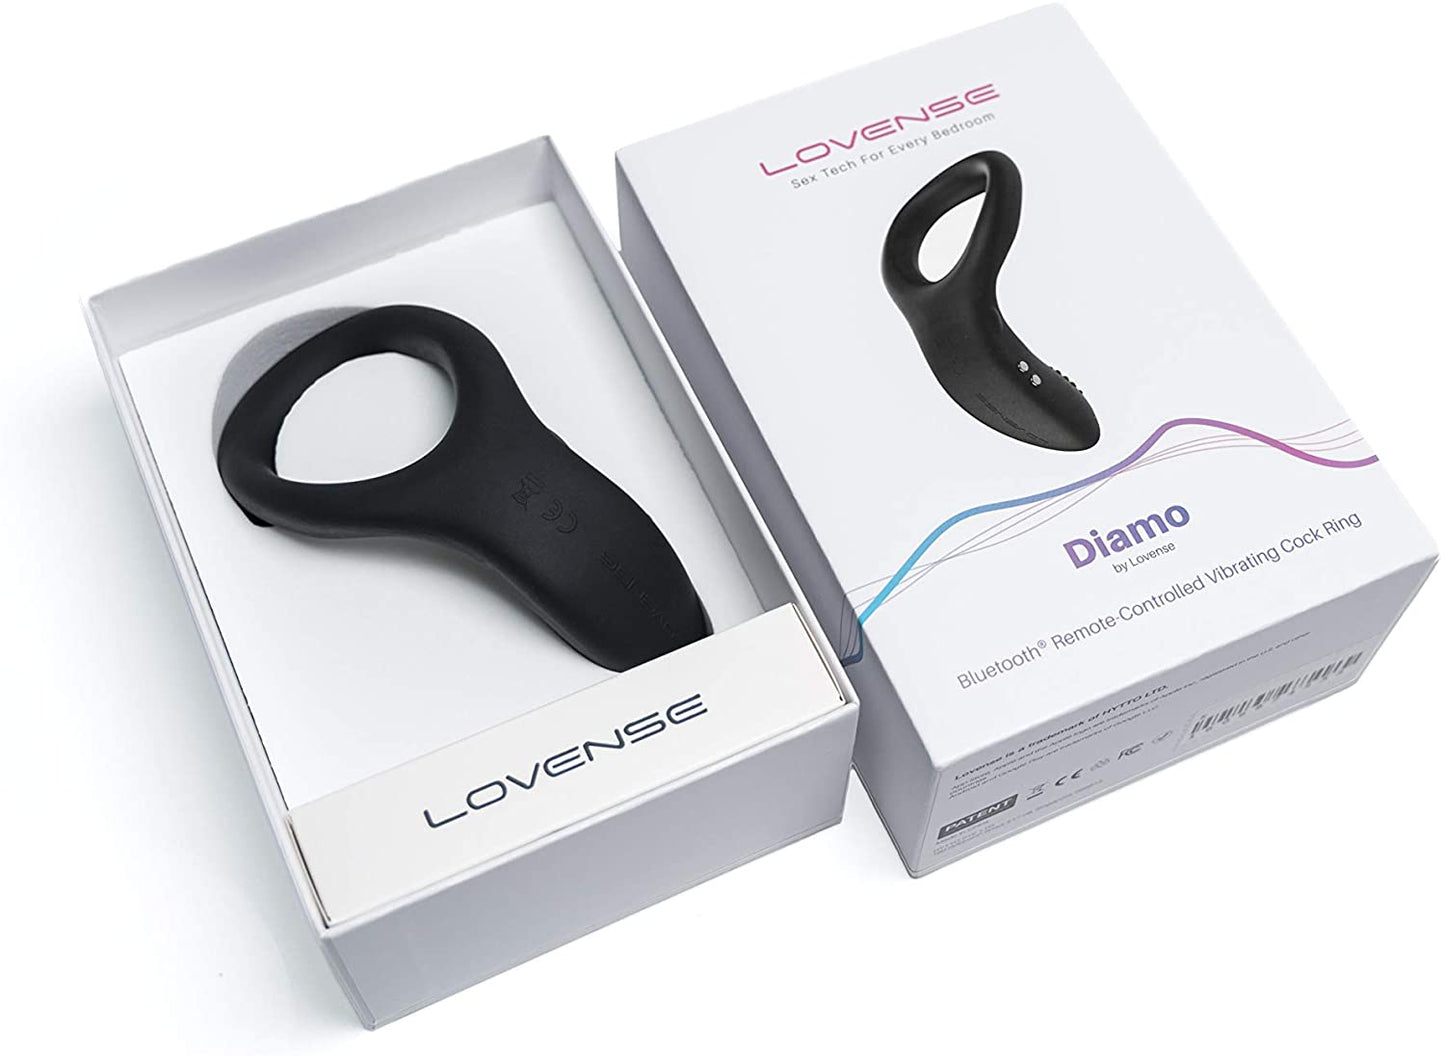 The lovense diamo in its packaging.